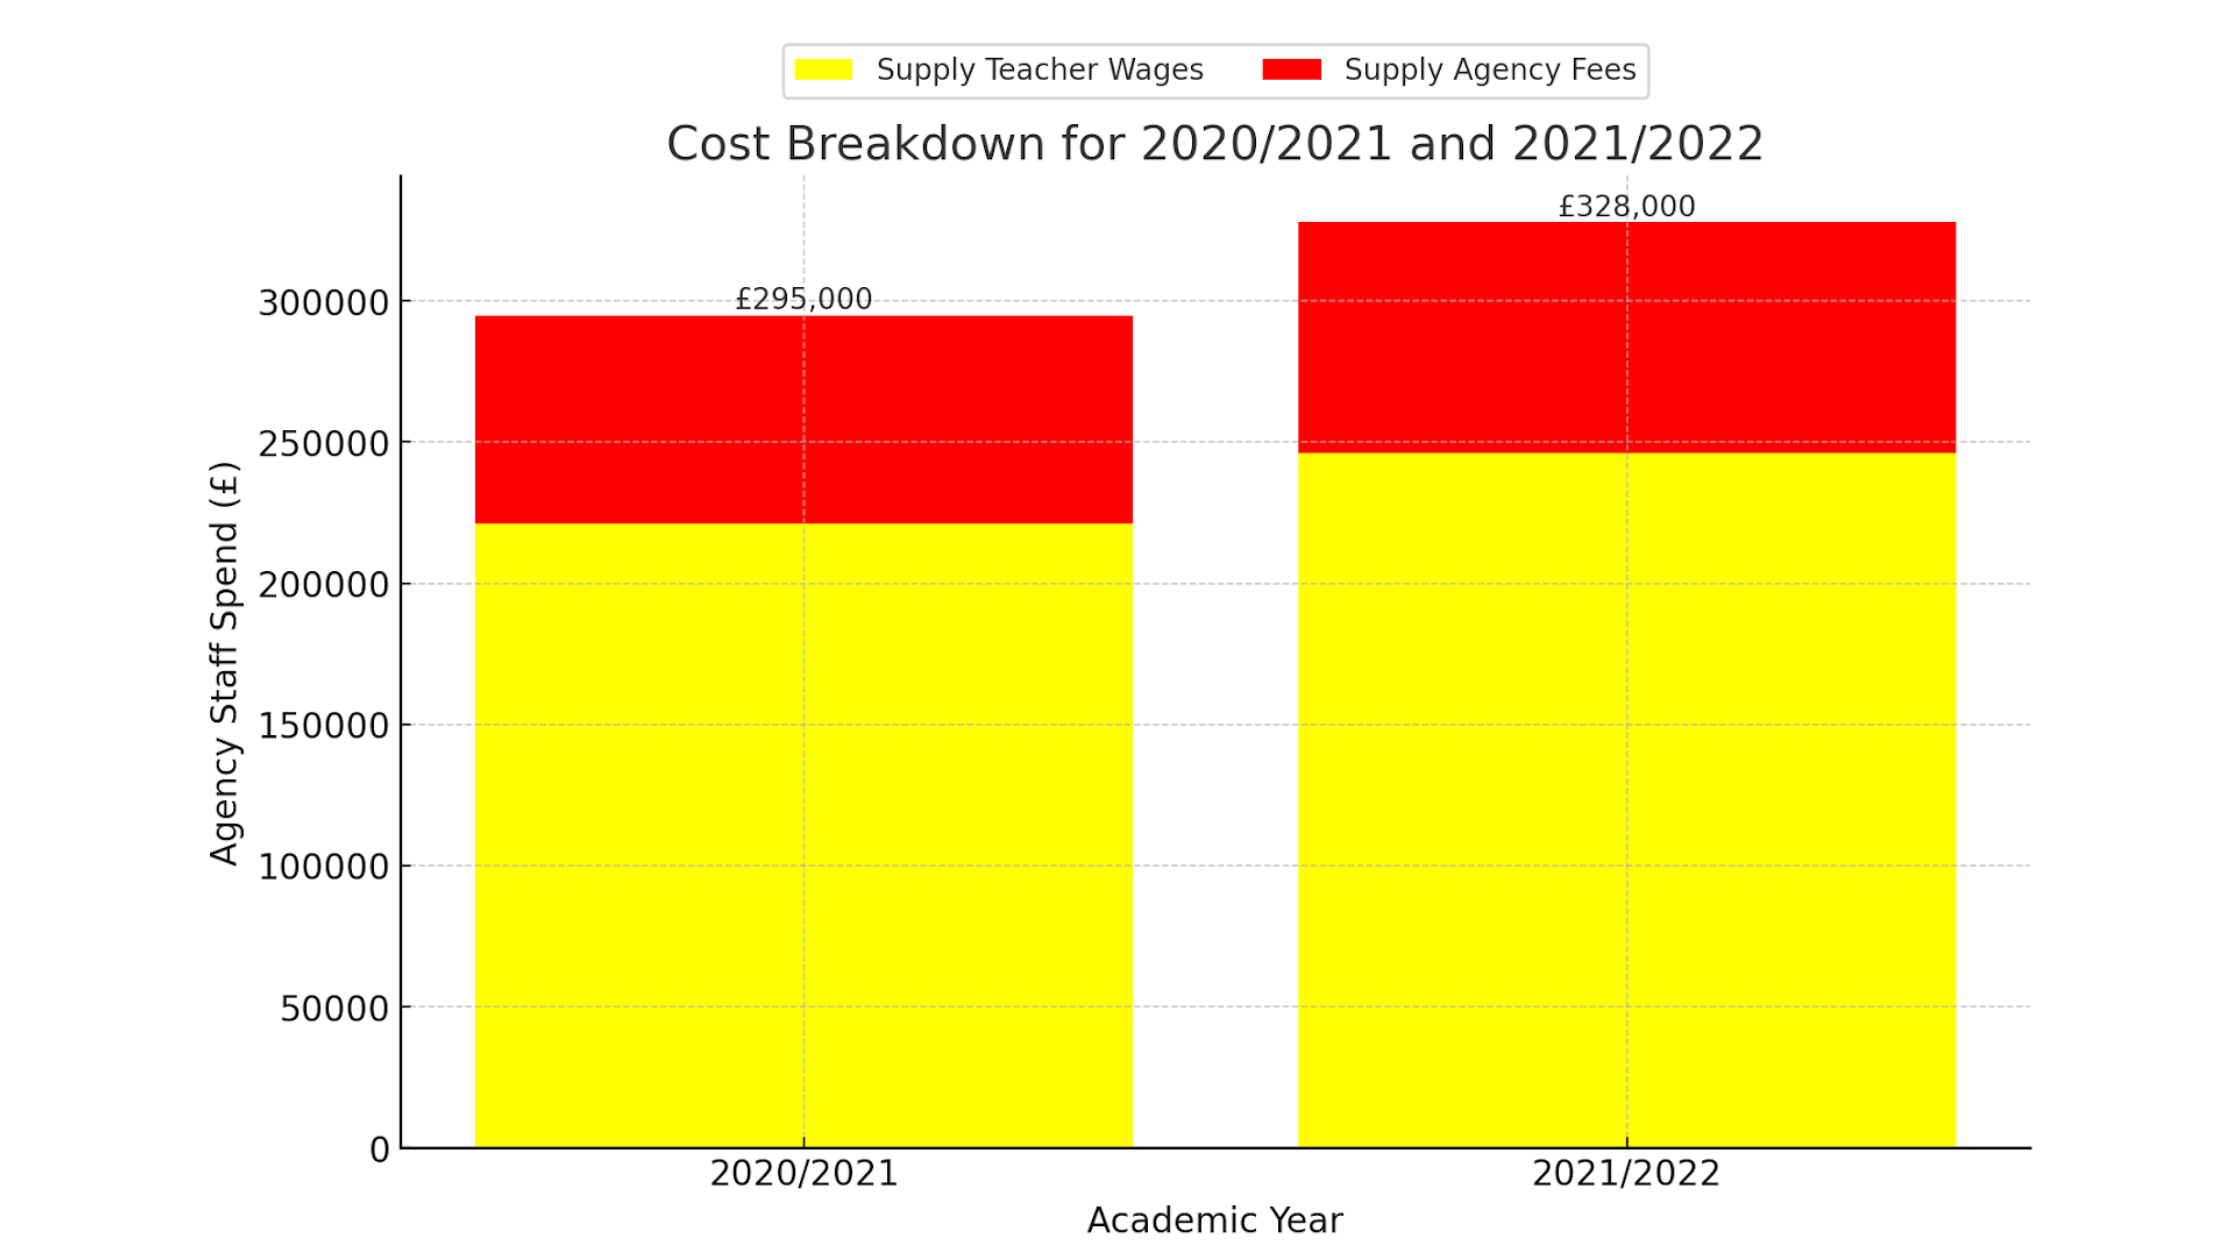 Graph showing cost breakdown for supply for years 20/21 and 21/22 for INMAT